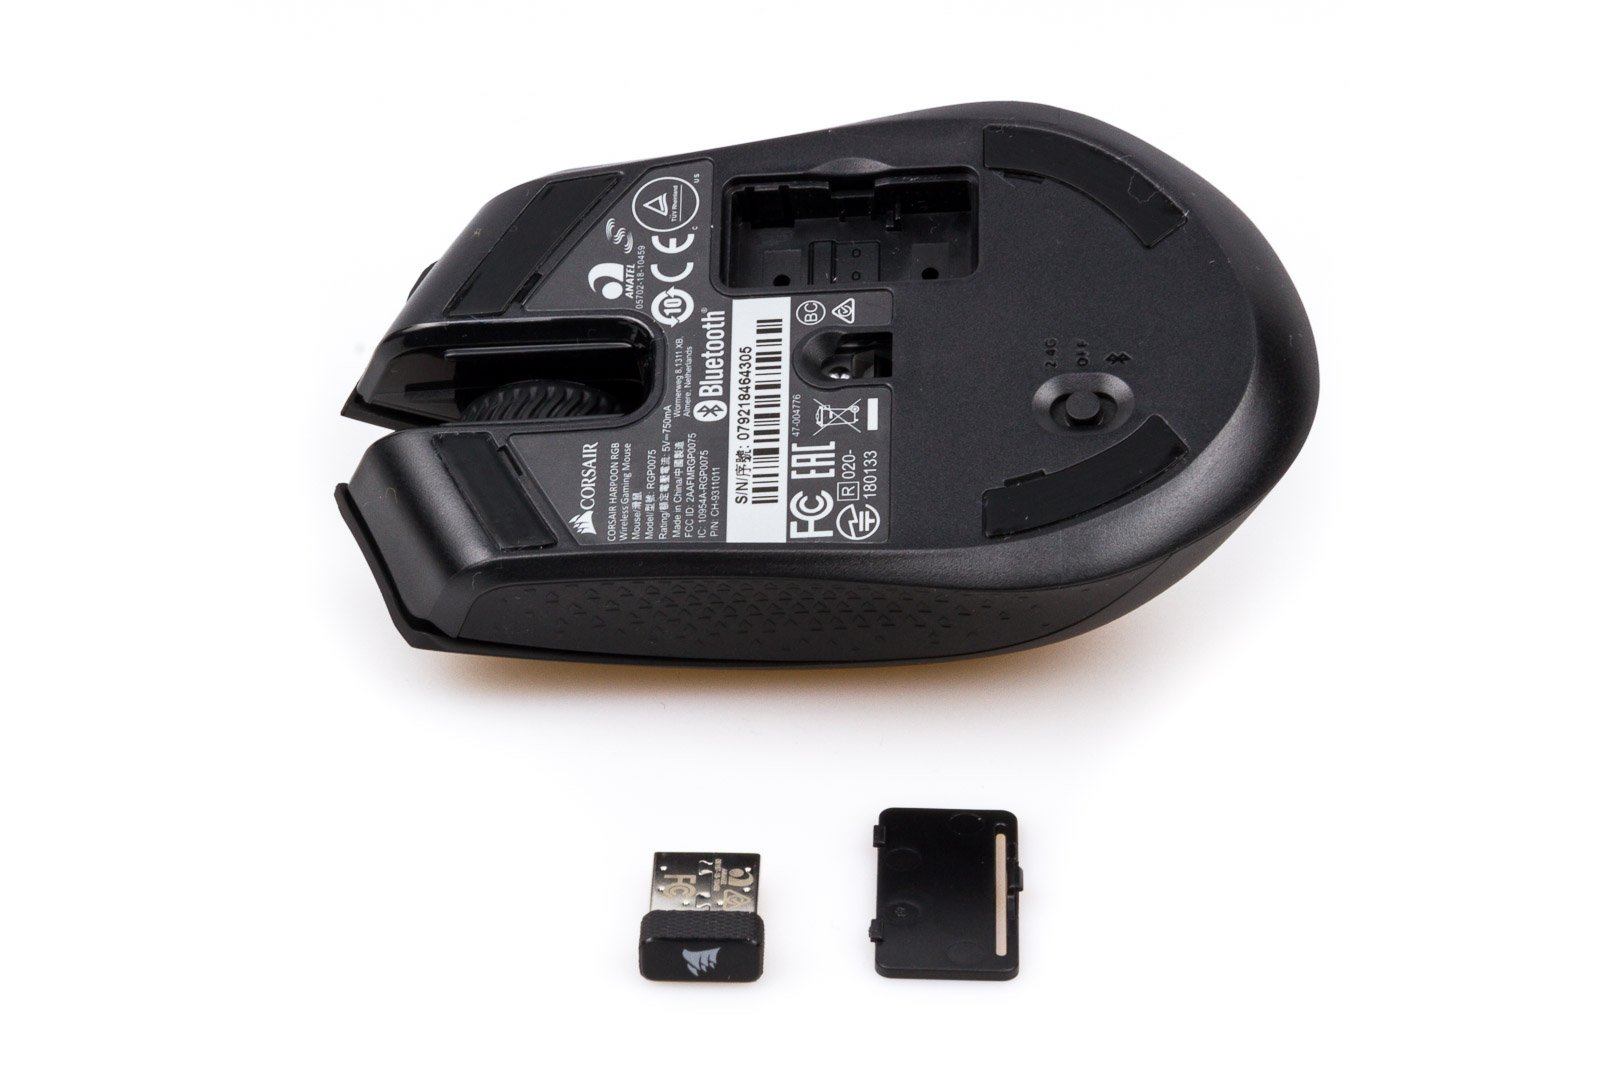 CORSAIR Wireless Mouse Review